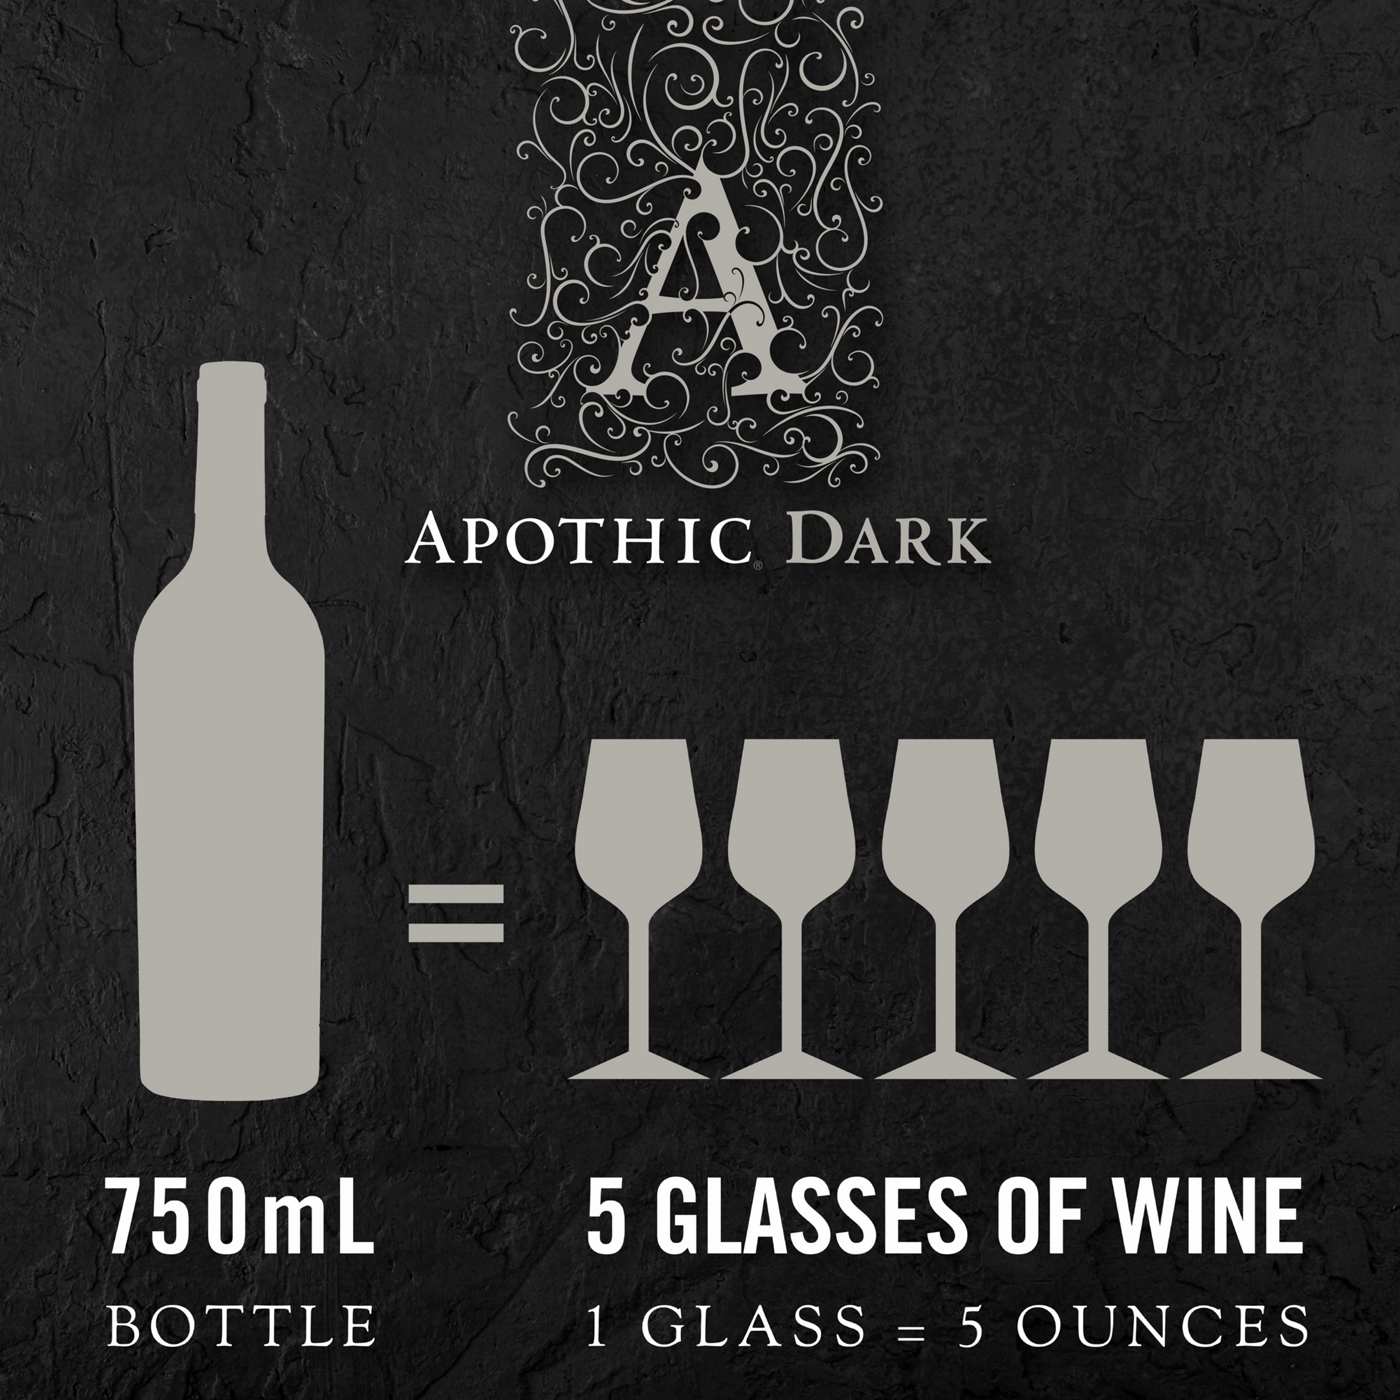 Apothic Dark Red Blend Red Wine 750ml; image 2 of 2